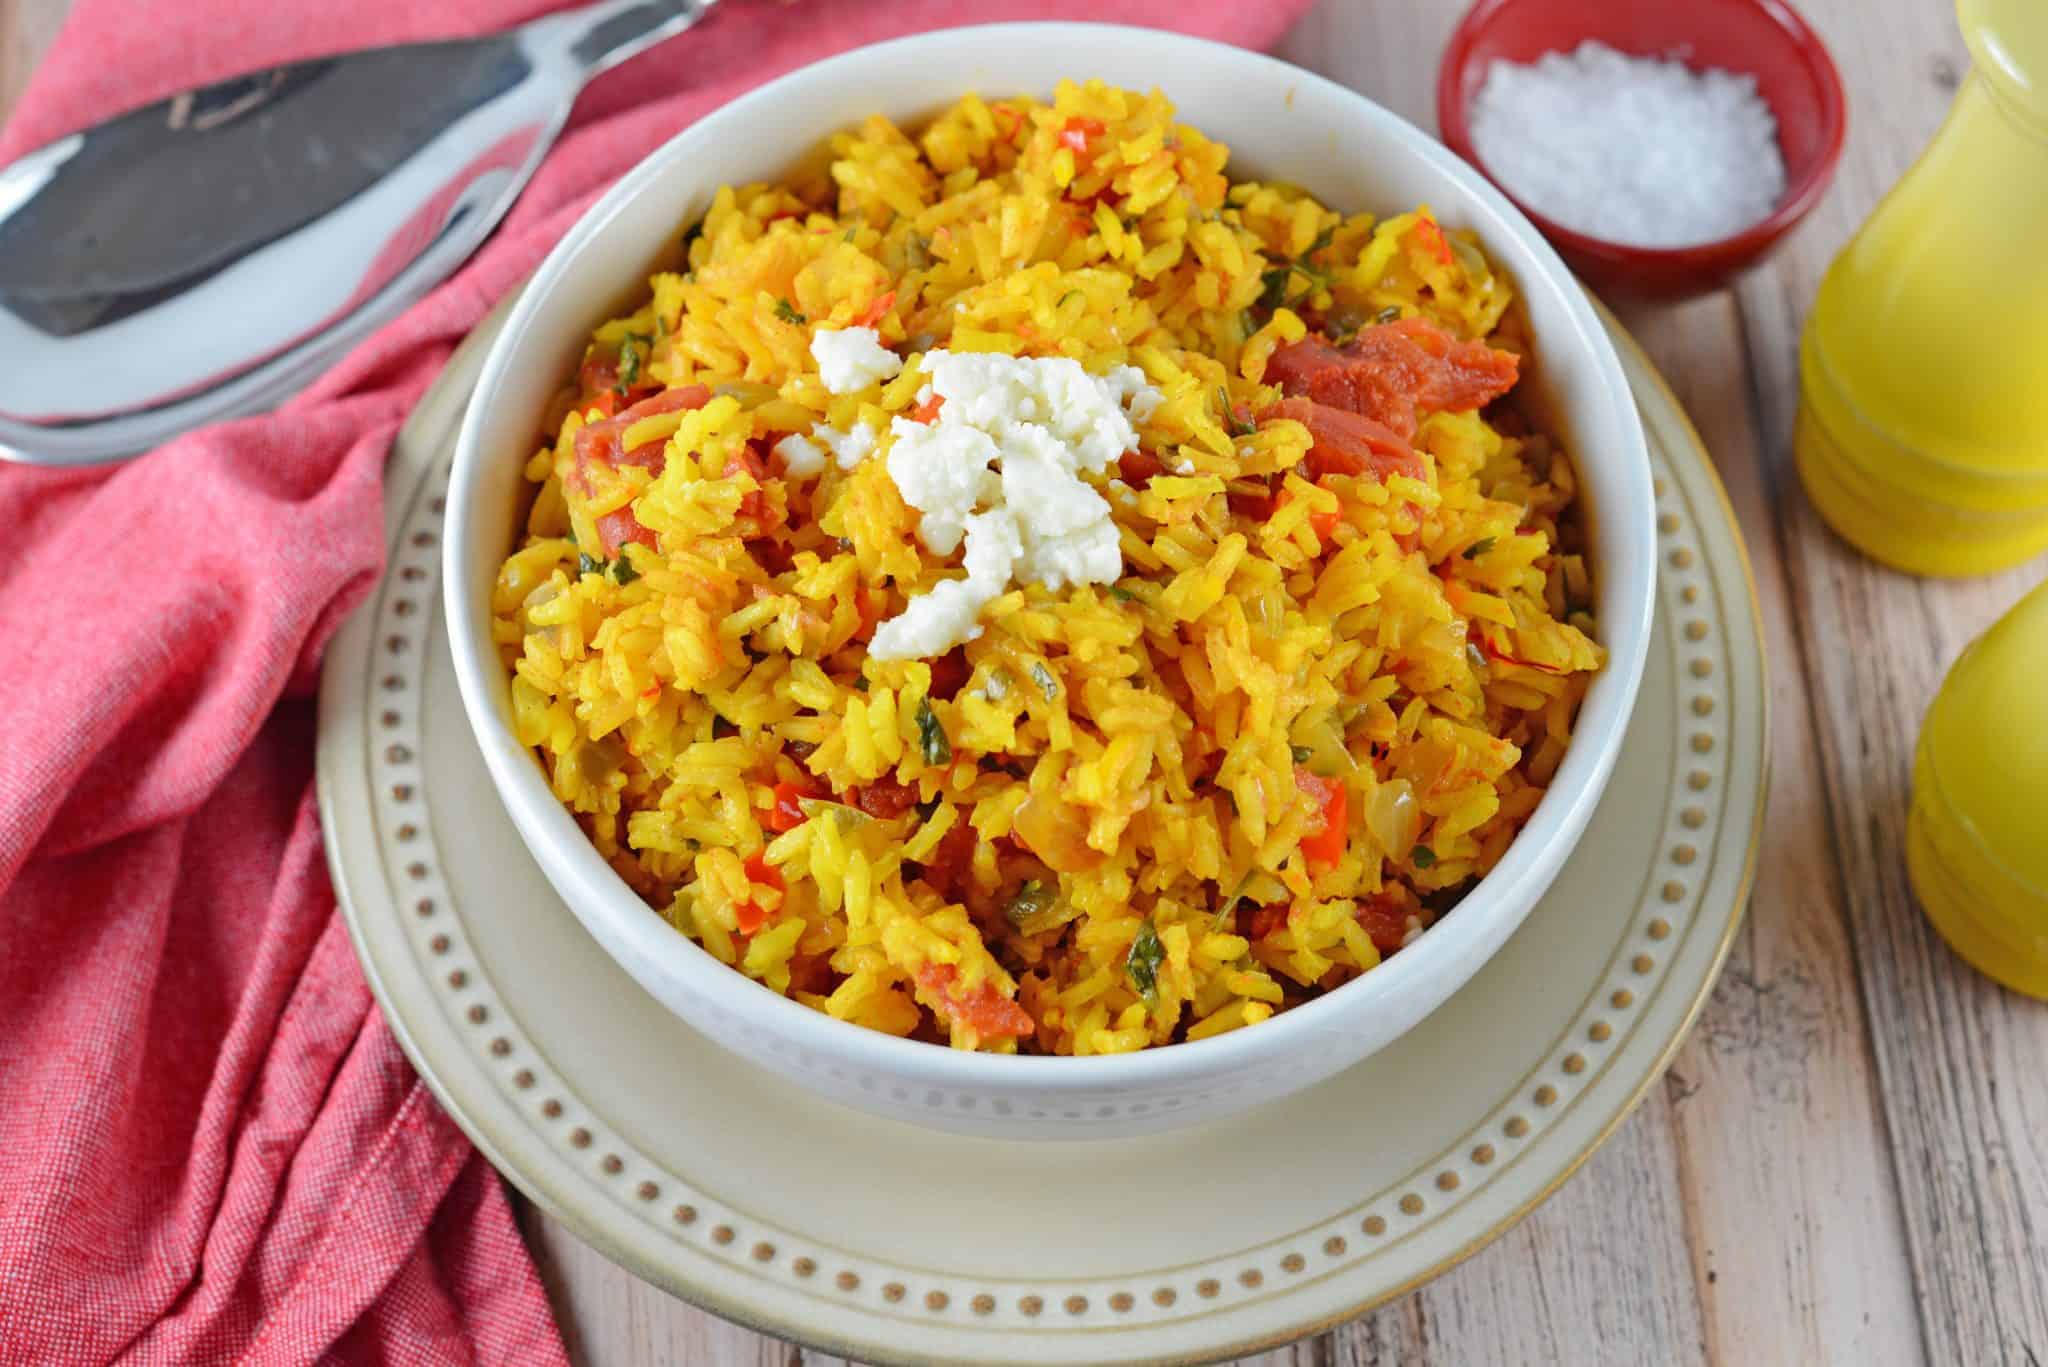 Mexican Rice is a zesty side dish recipe packed with vegetables and flavor. Serve with your favorite Mexican recipes, inside burritos or as its own dish.